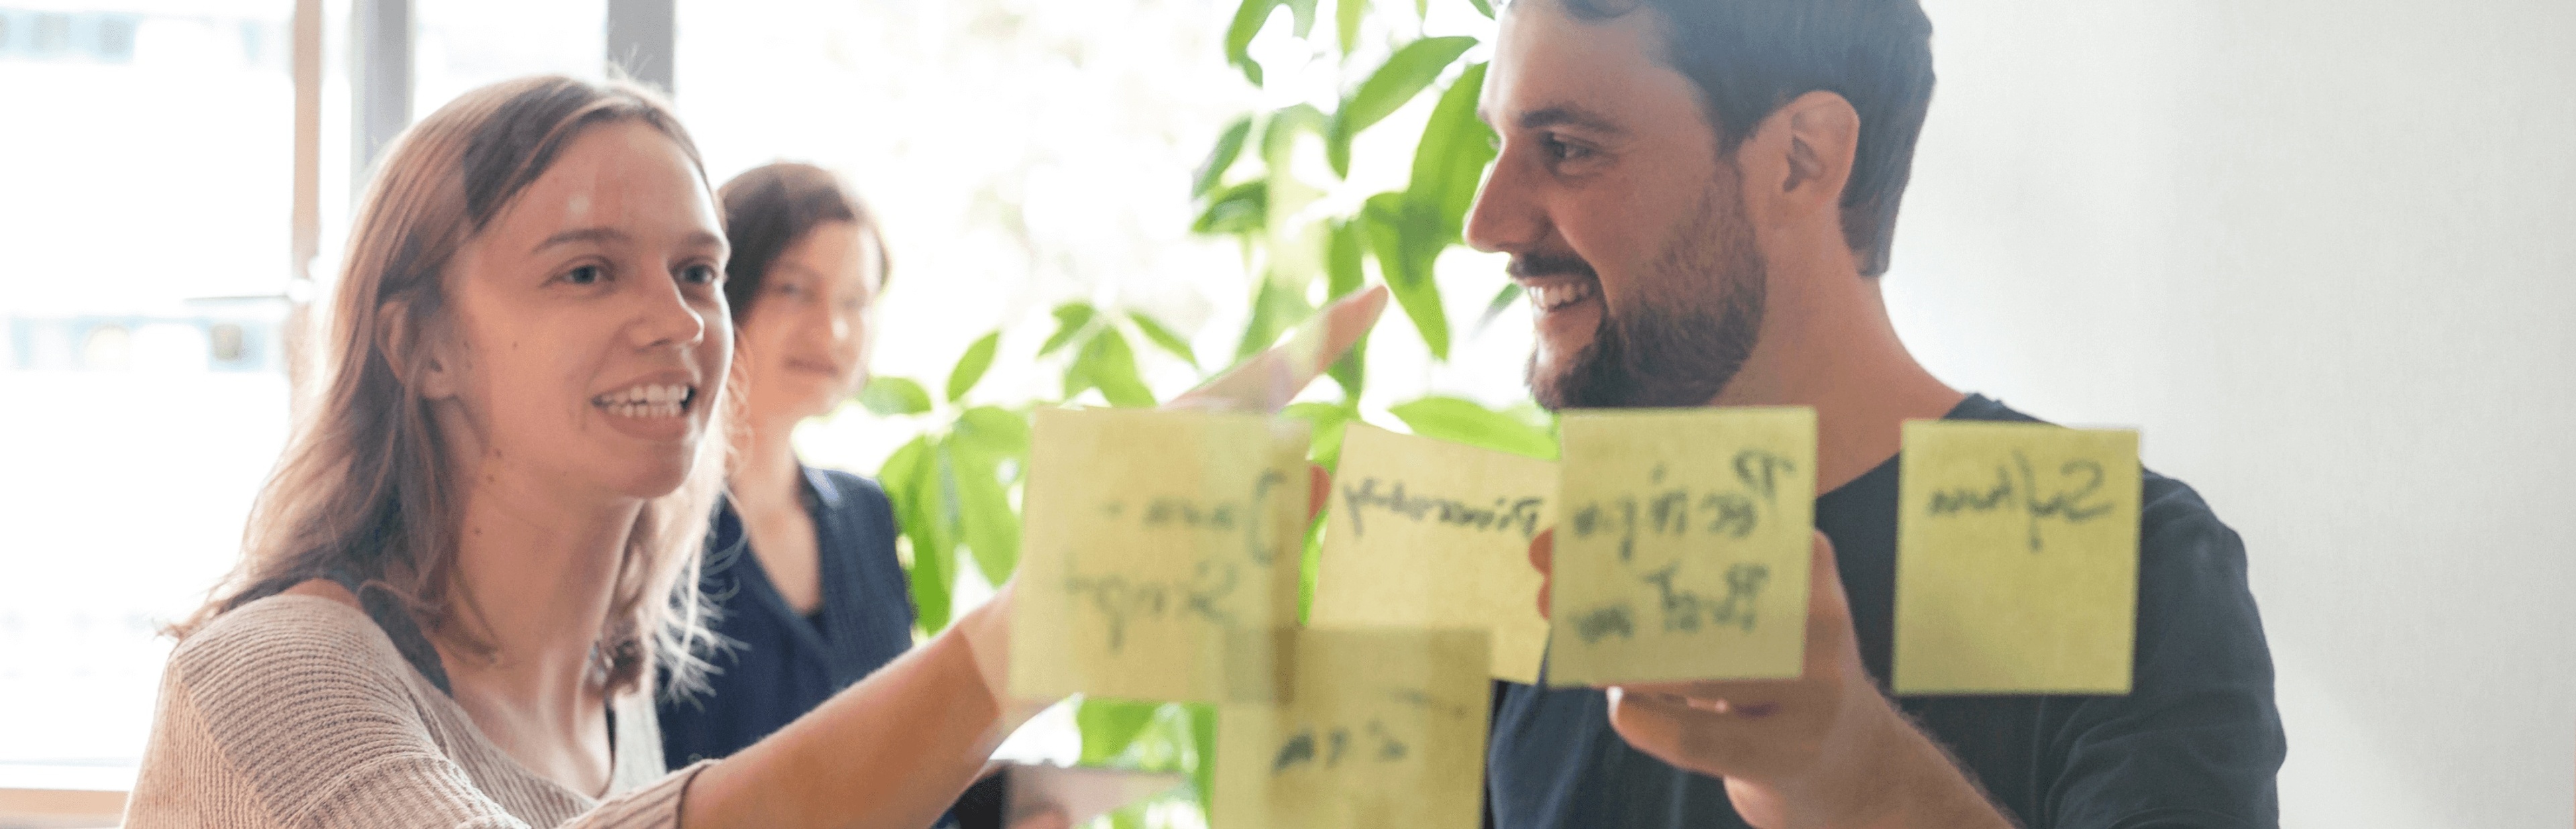 Two UX designers during a lean inception workshop